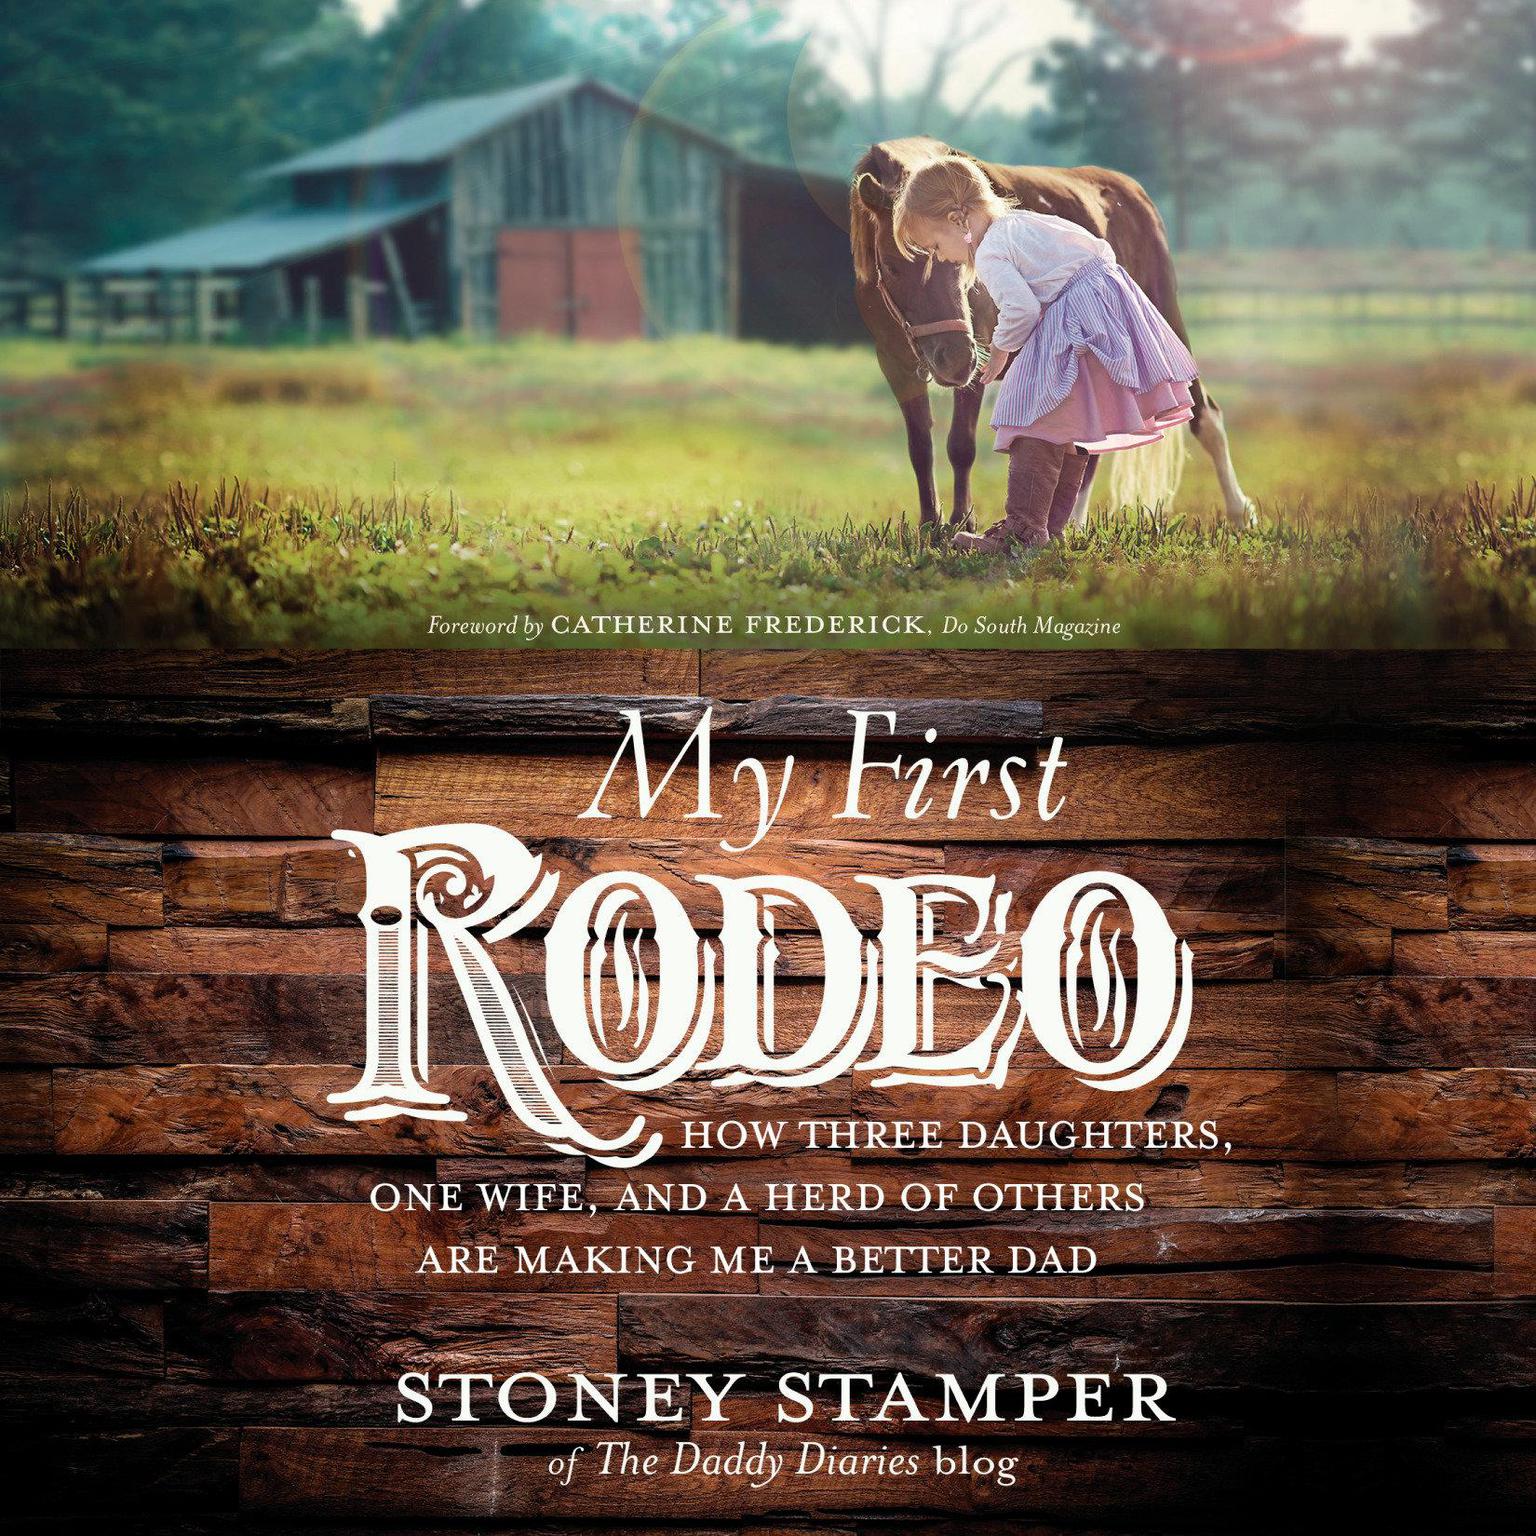 My First Rodeo: How Three Daughters, One Wife, and a Herd of Others Are Making Me a Better Dad Audiobook, by Stoney Stamper